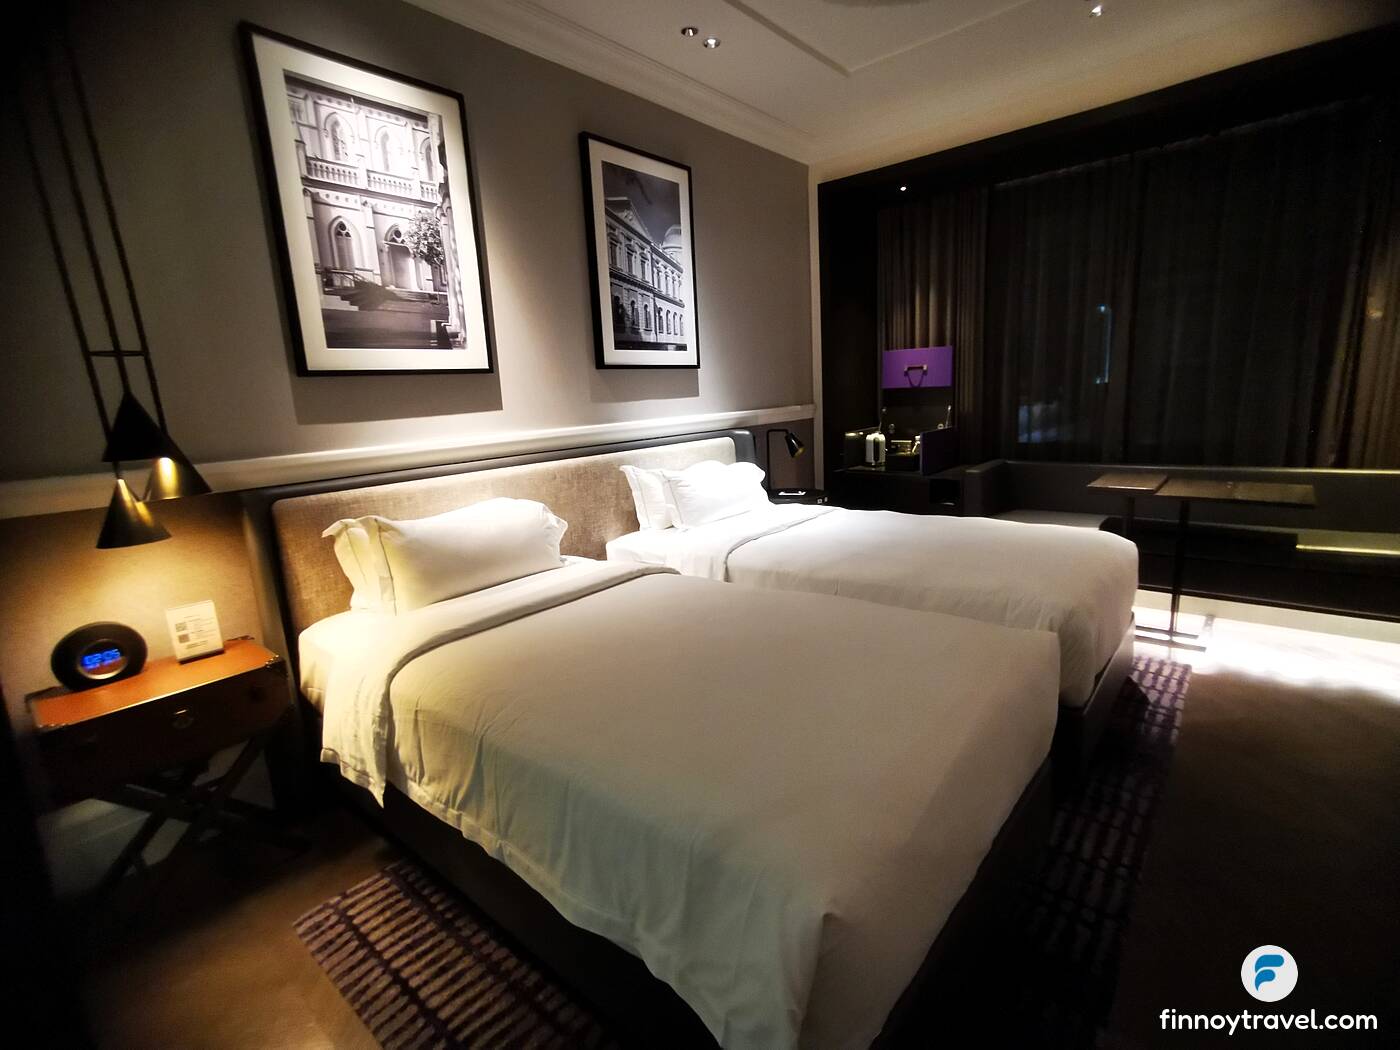 Lufthansa provided a one-night accommodation affected by flight cancellation at the Grand Park City Hall Hotel